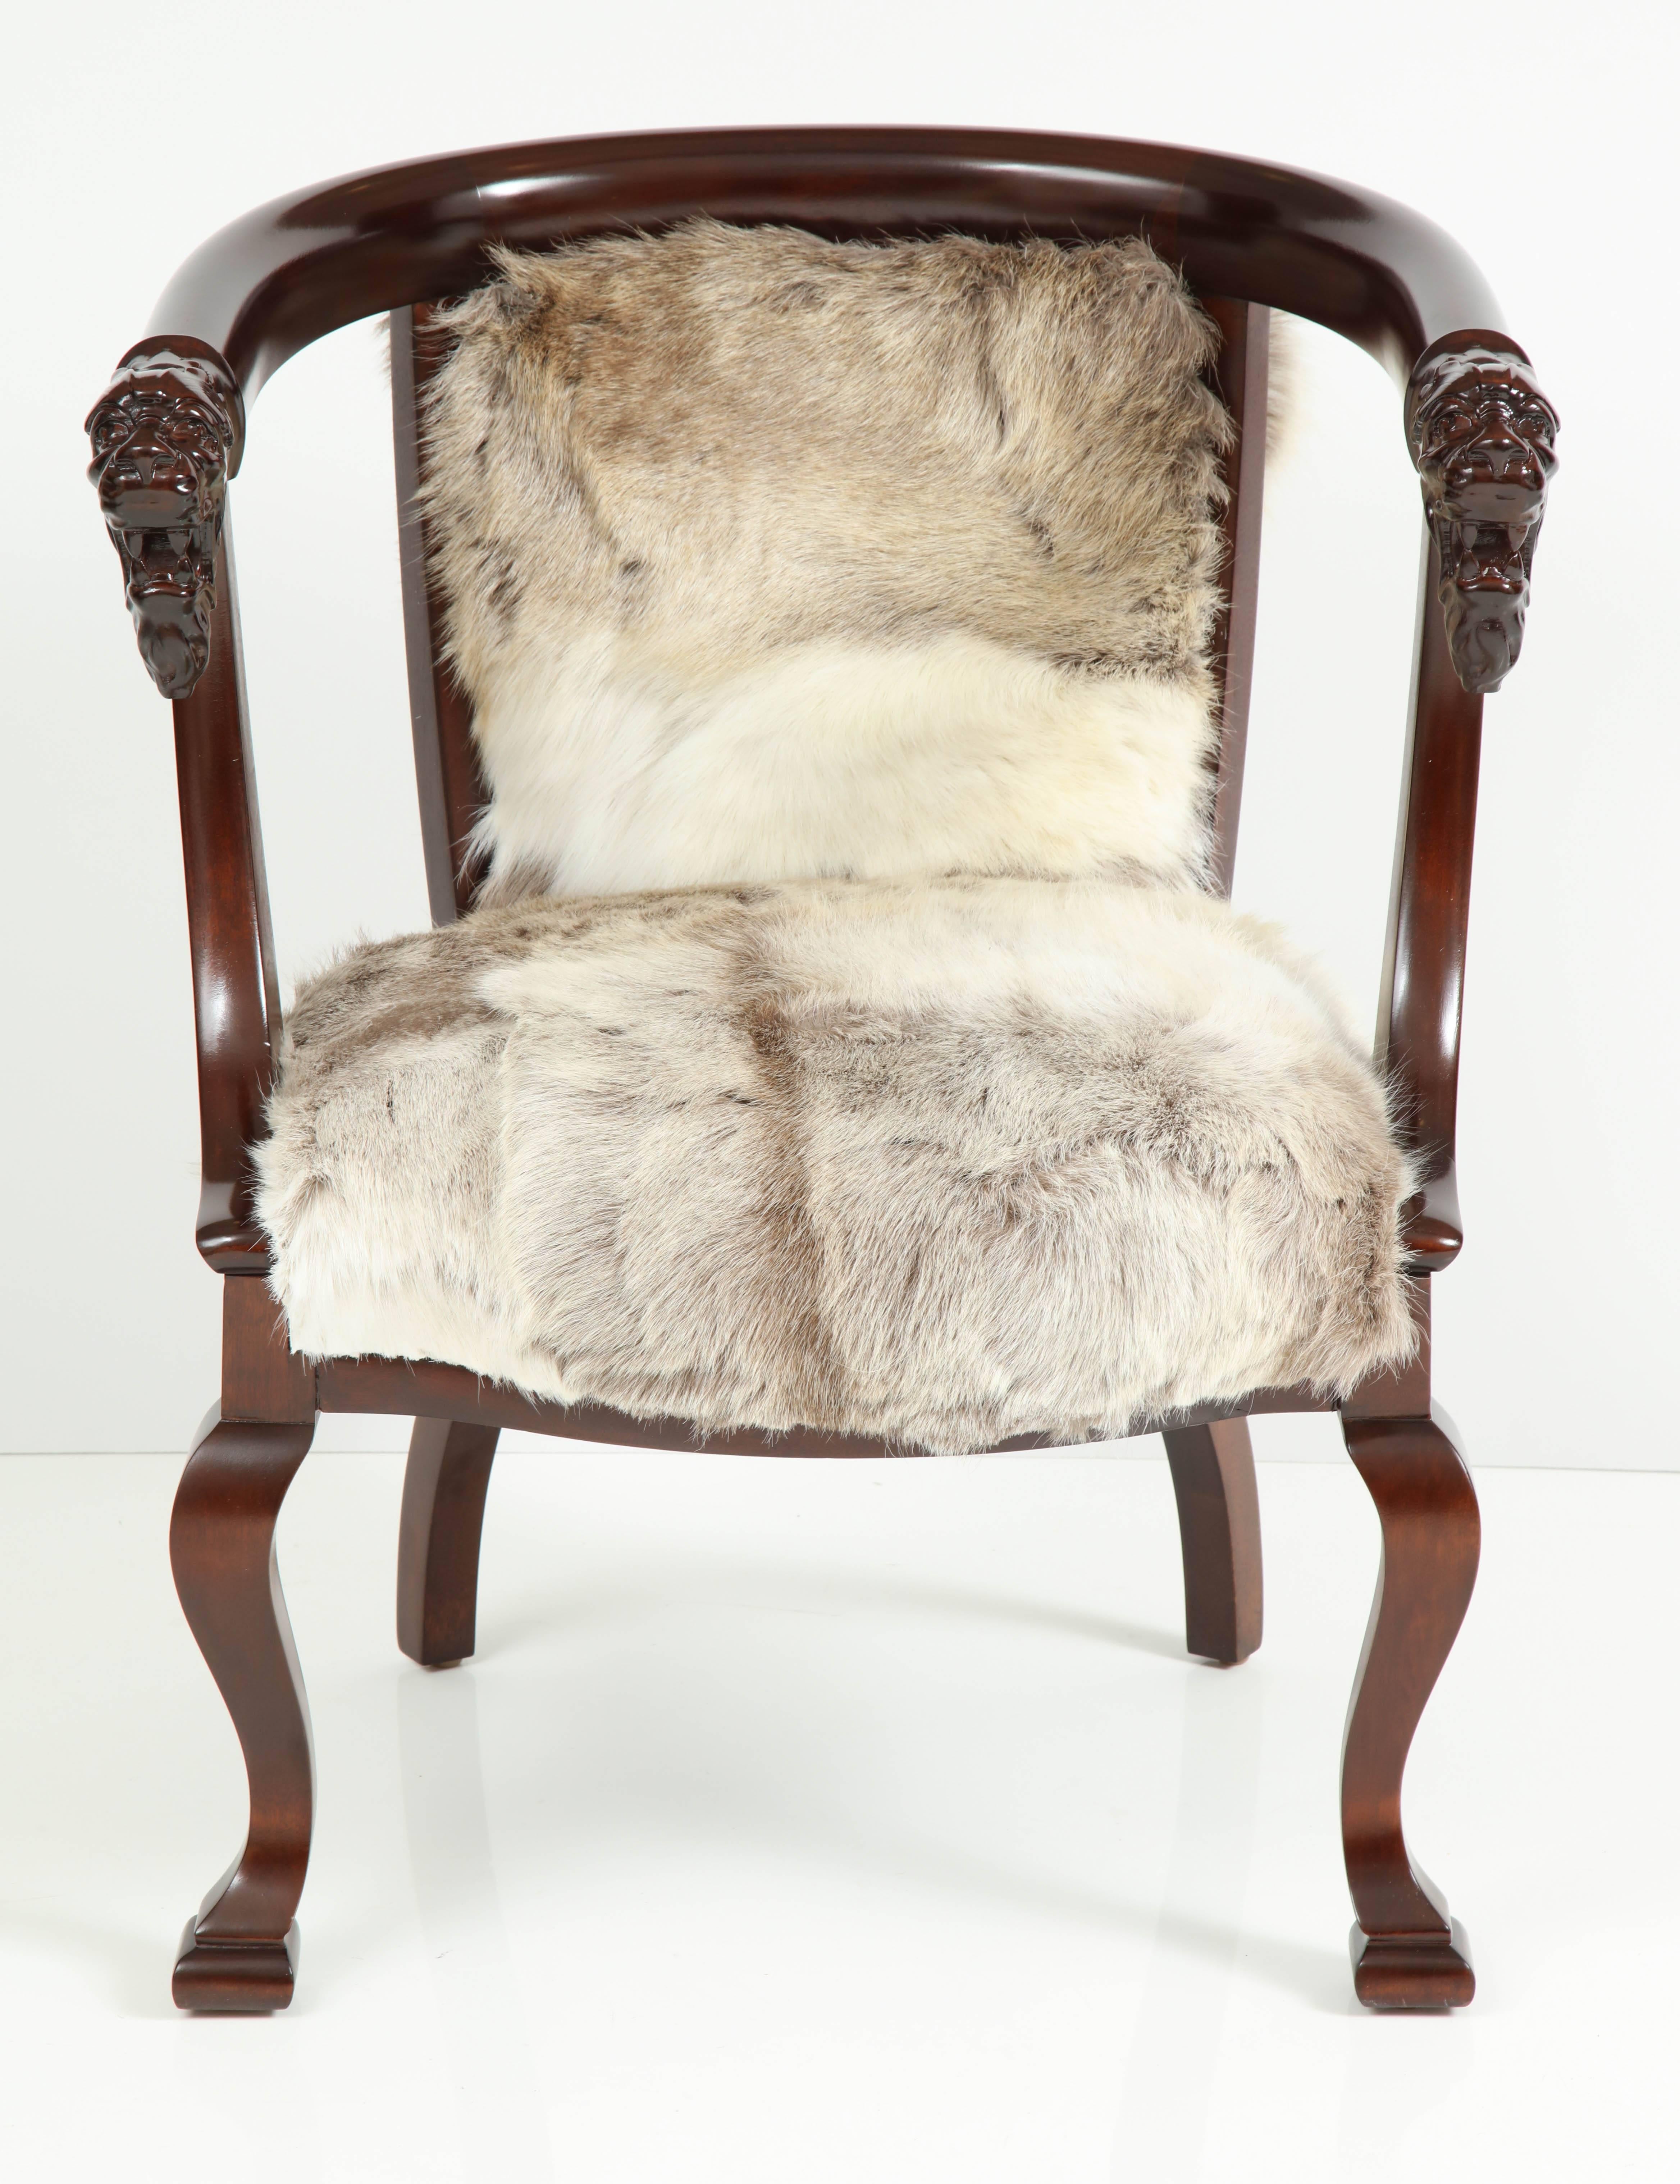 Exquisite Mahogany framed barrel back club chair featuring hand-carved lion head detail on each arm with sinuous graceful legs. Chair has been mint restored in a rich brown finish and upholstered in Finnish reindeer hides. A great statement piece